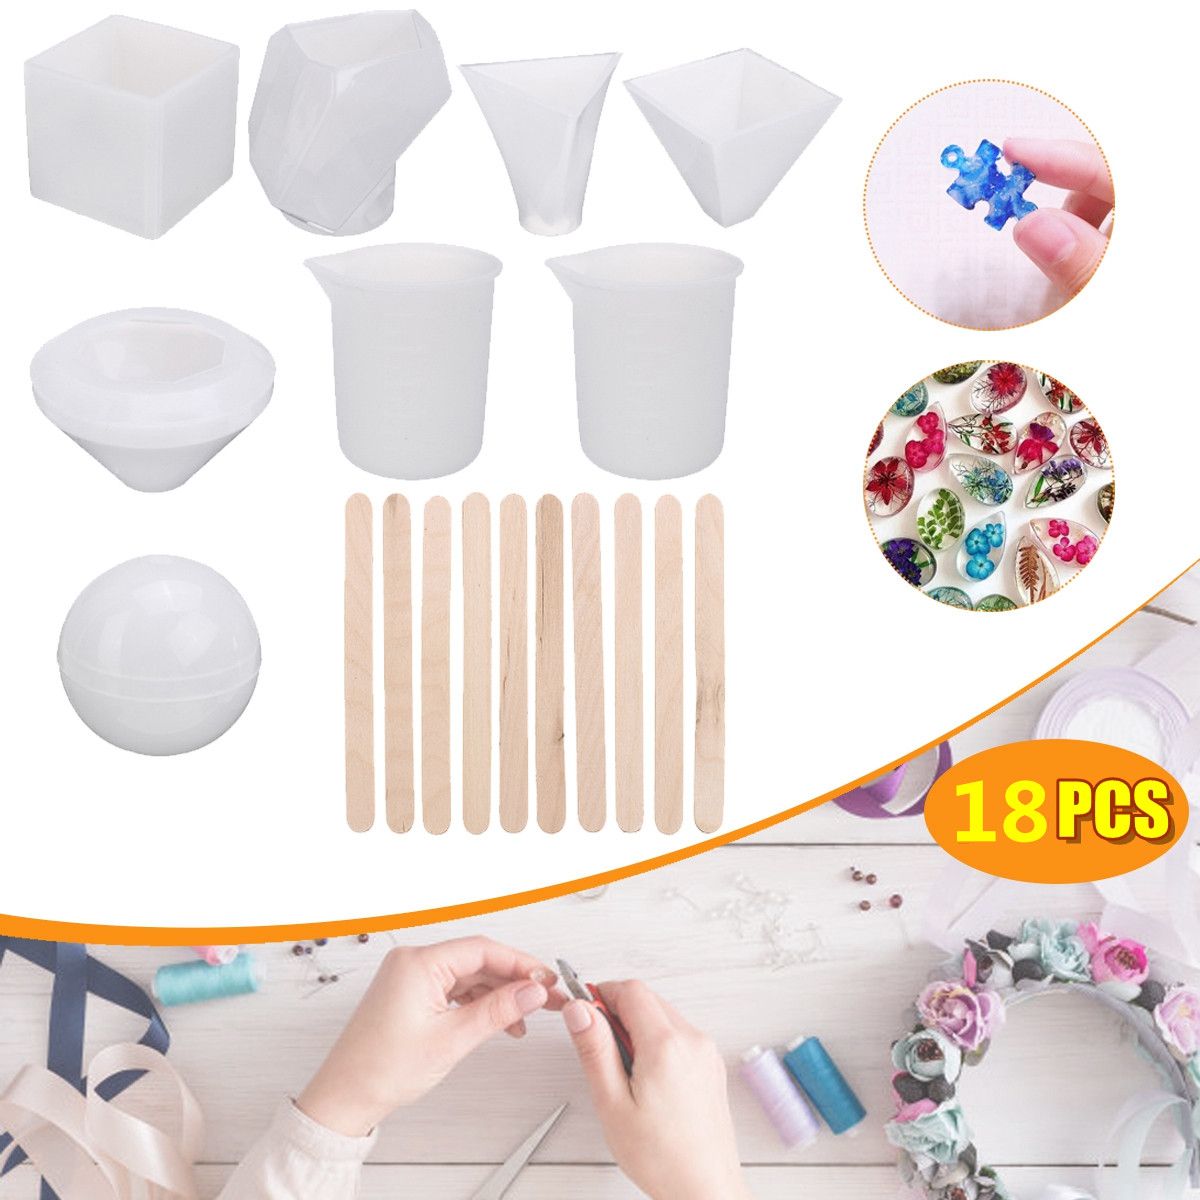 18pcs-Jewelry-Mould-Handmade-Crystal-Glue-Mould-Set-Resin-Silicone-DIY-Mold-Kit-1739573